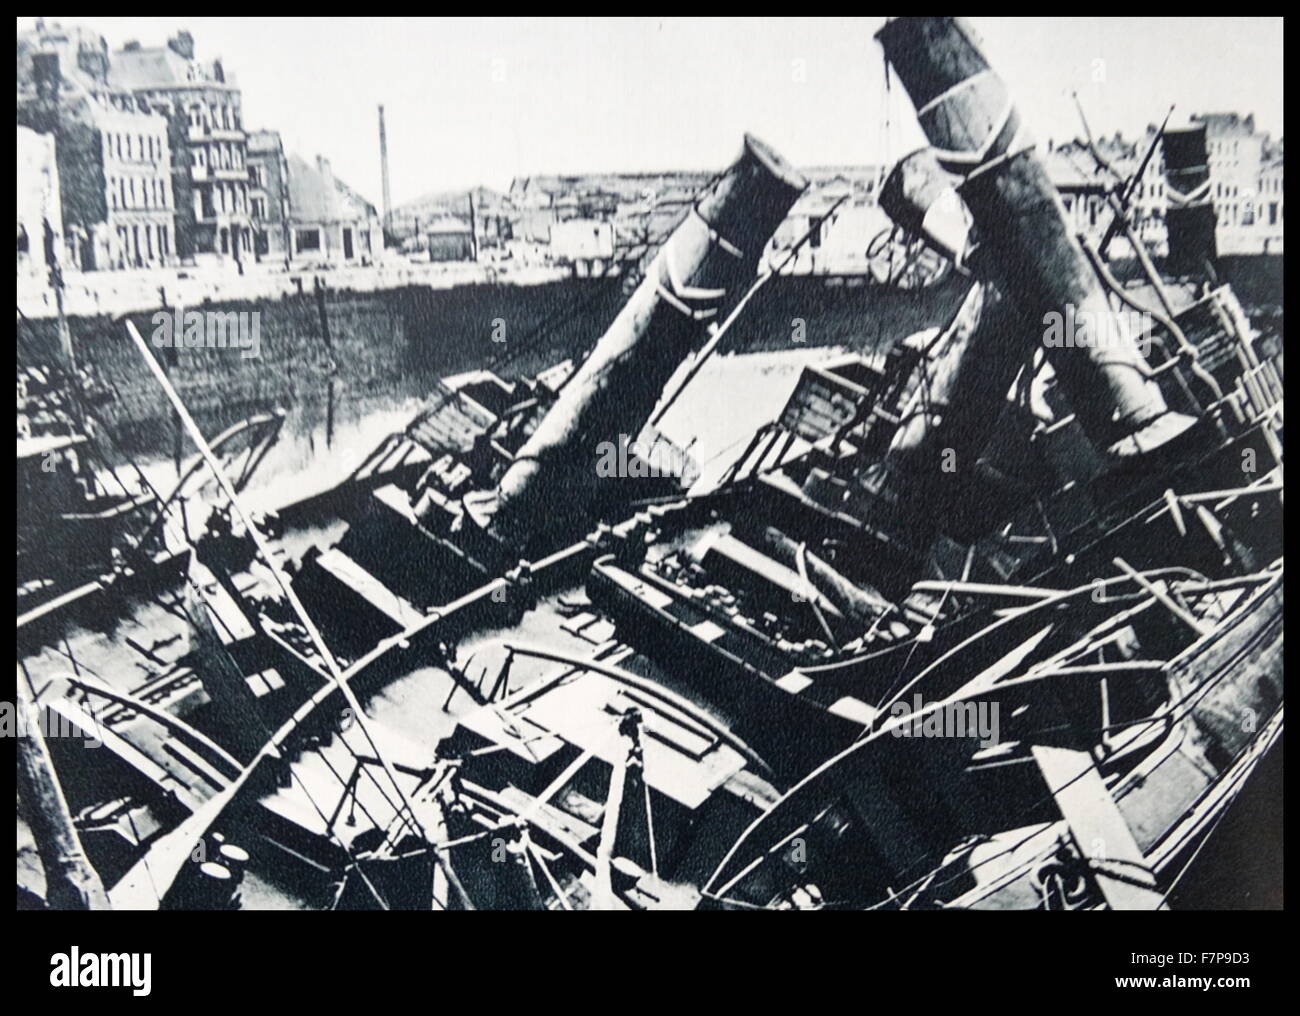 Dutch port that has been destroyed by German armed forces. Image taken during the invasion of Holland, 1940. Stock Photo